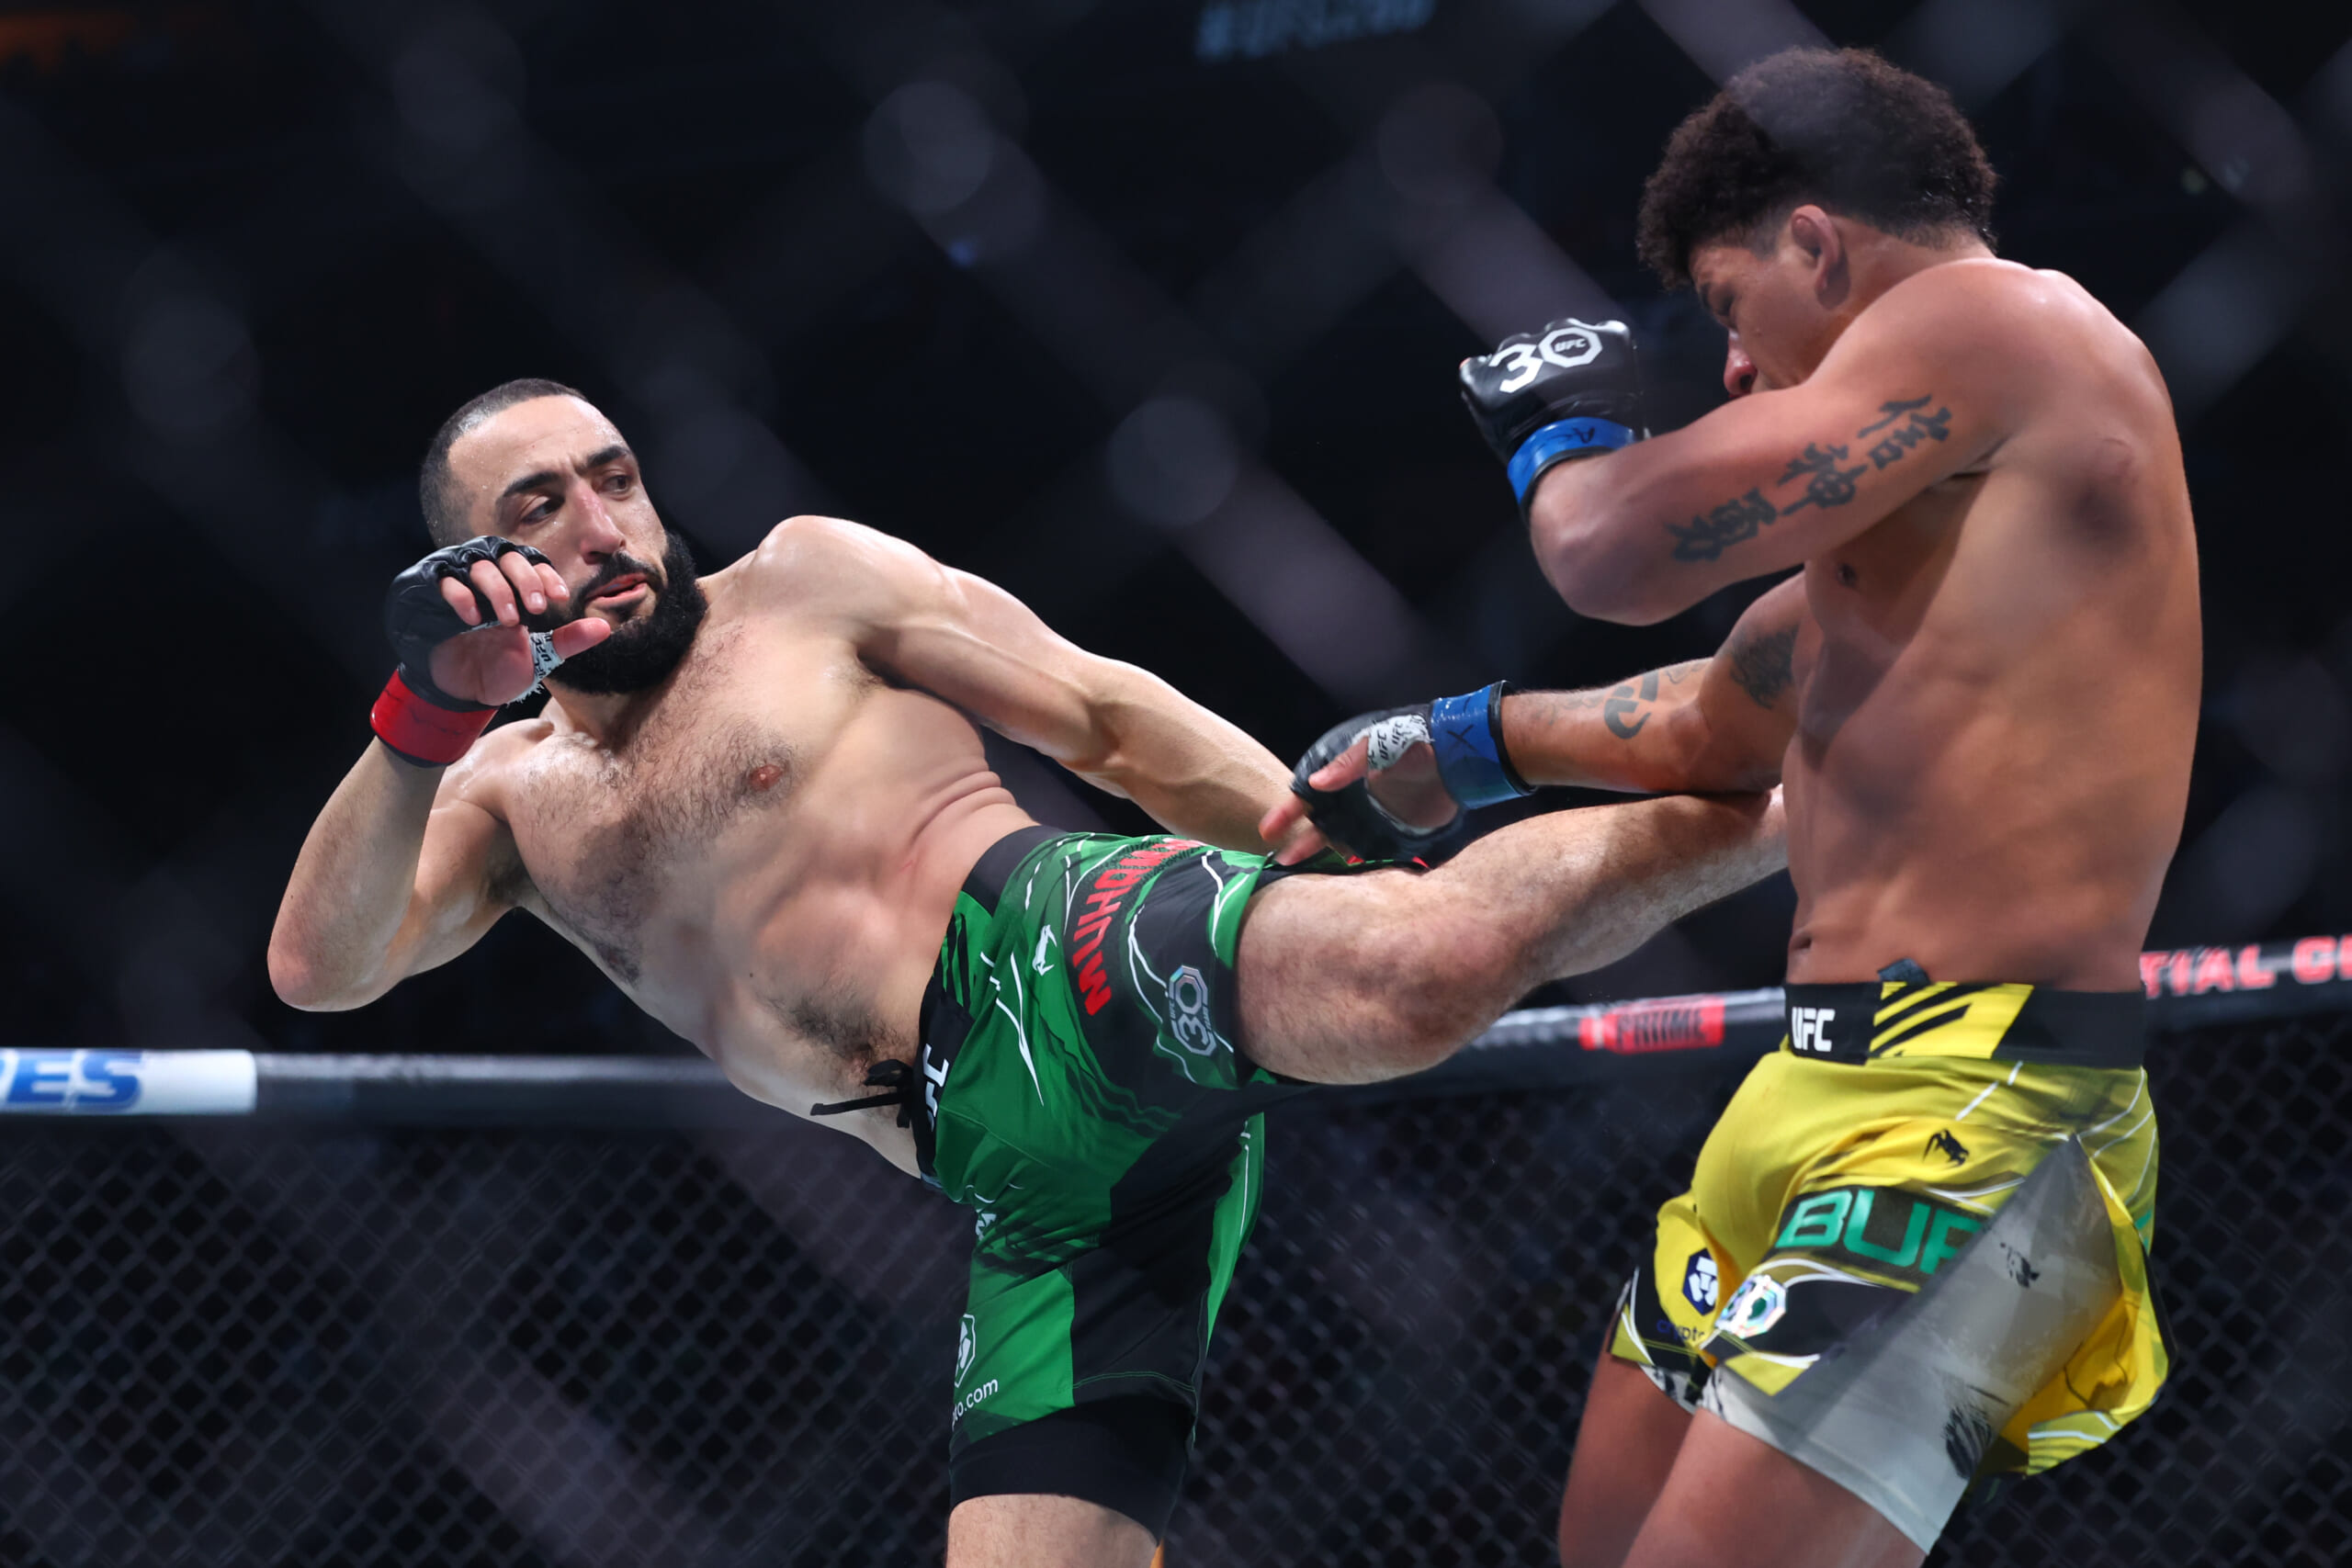 Did Belal Muhammad earn his title shot at UFC 288?